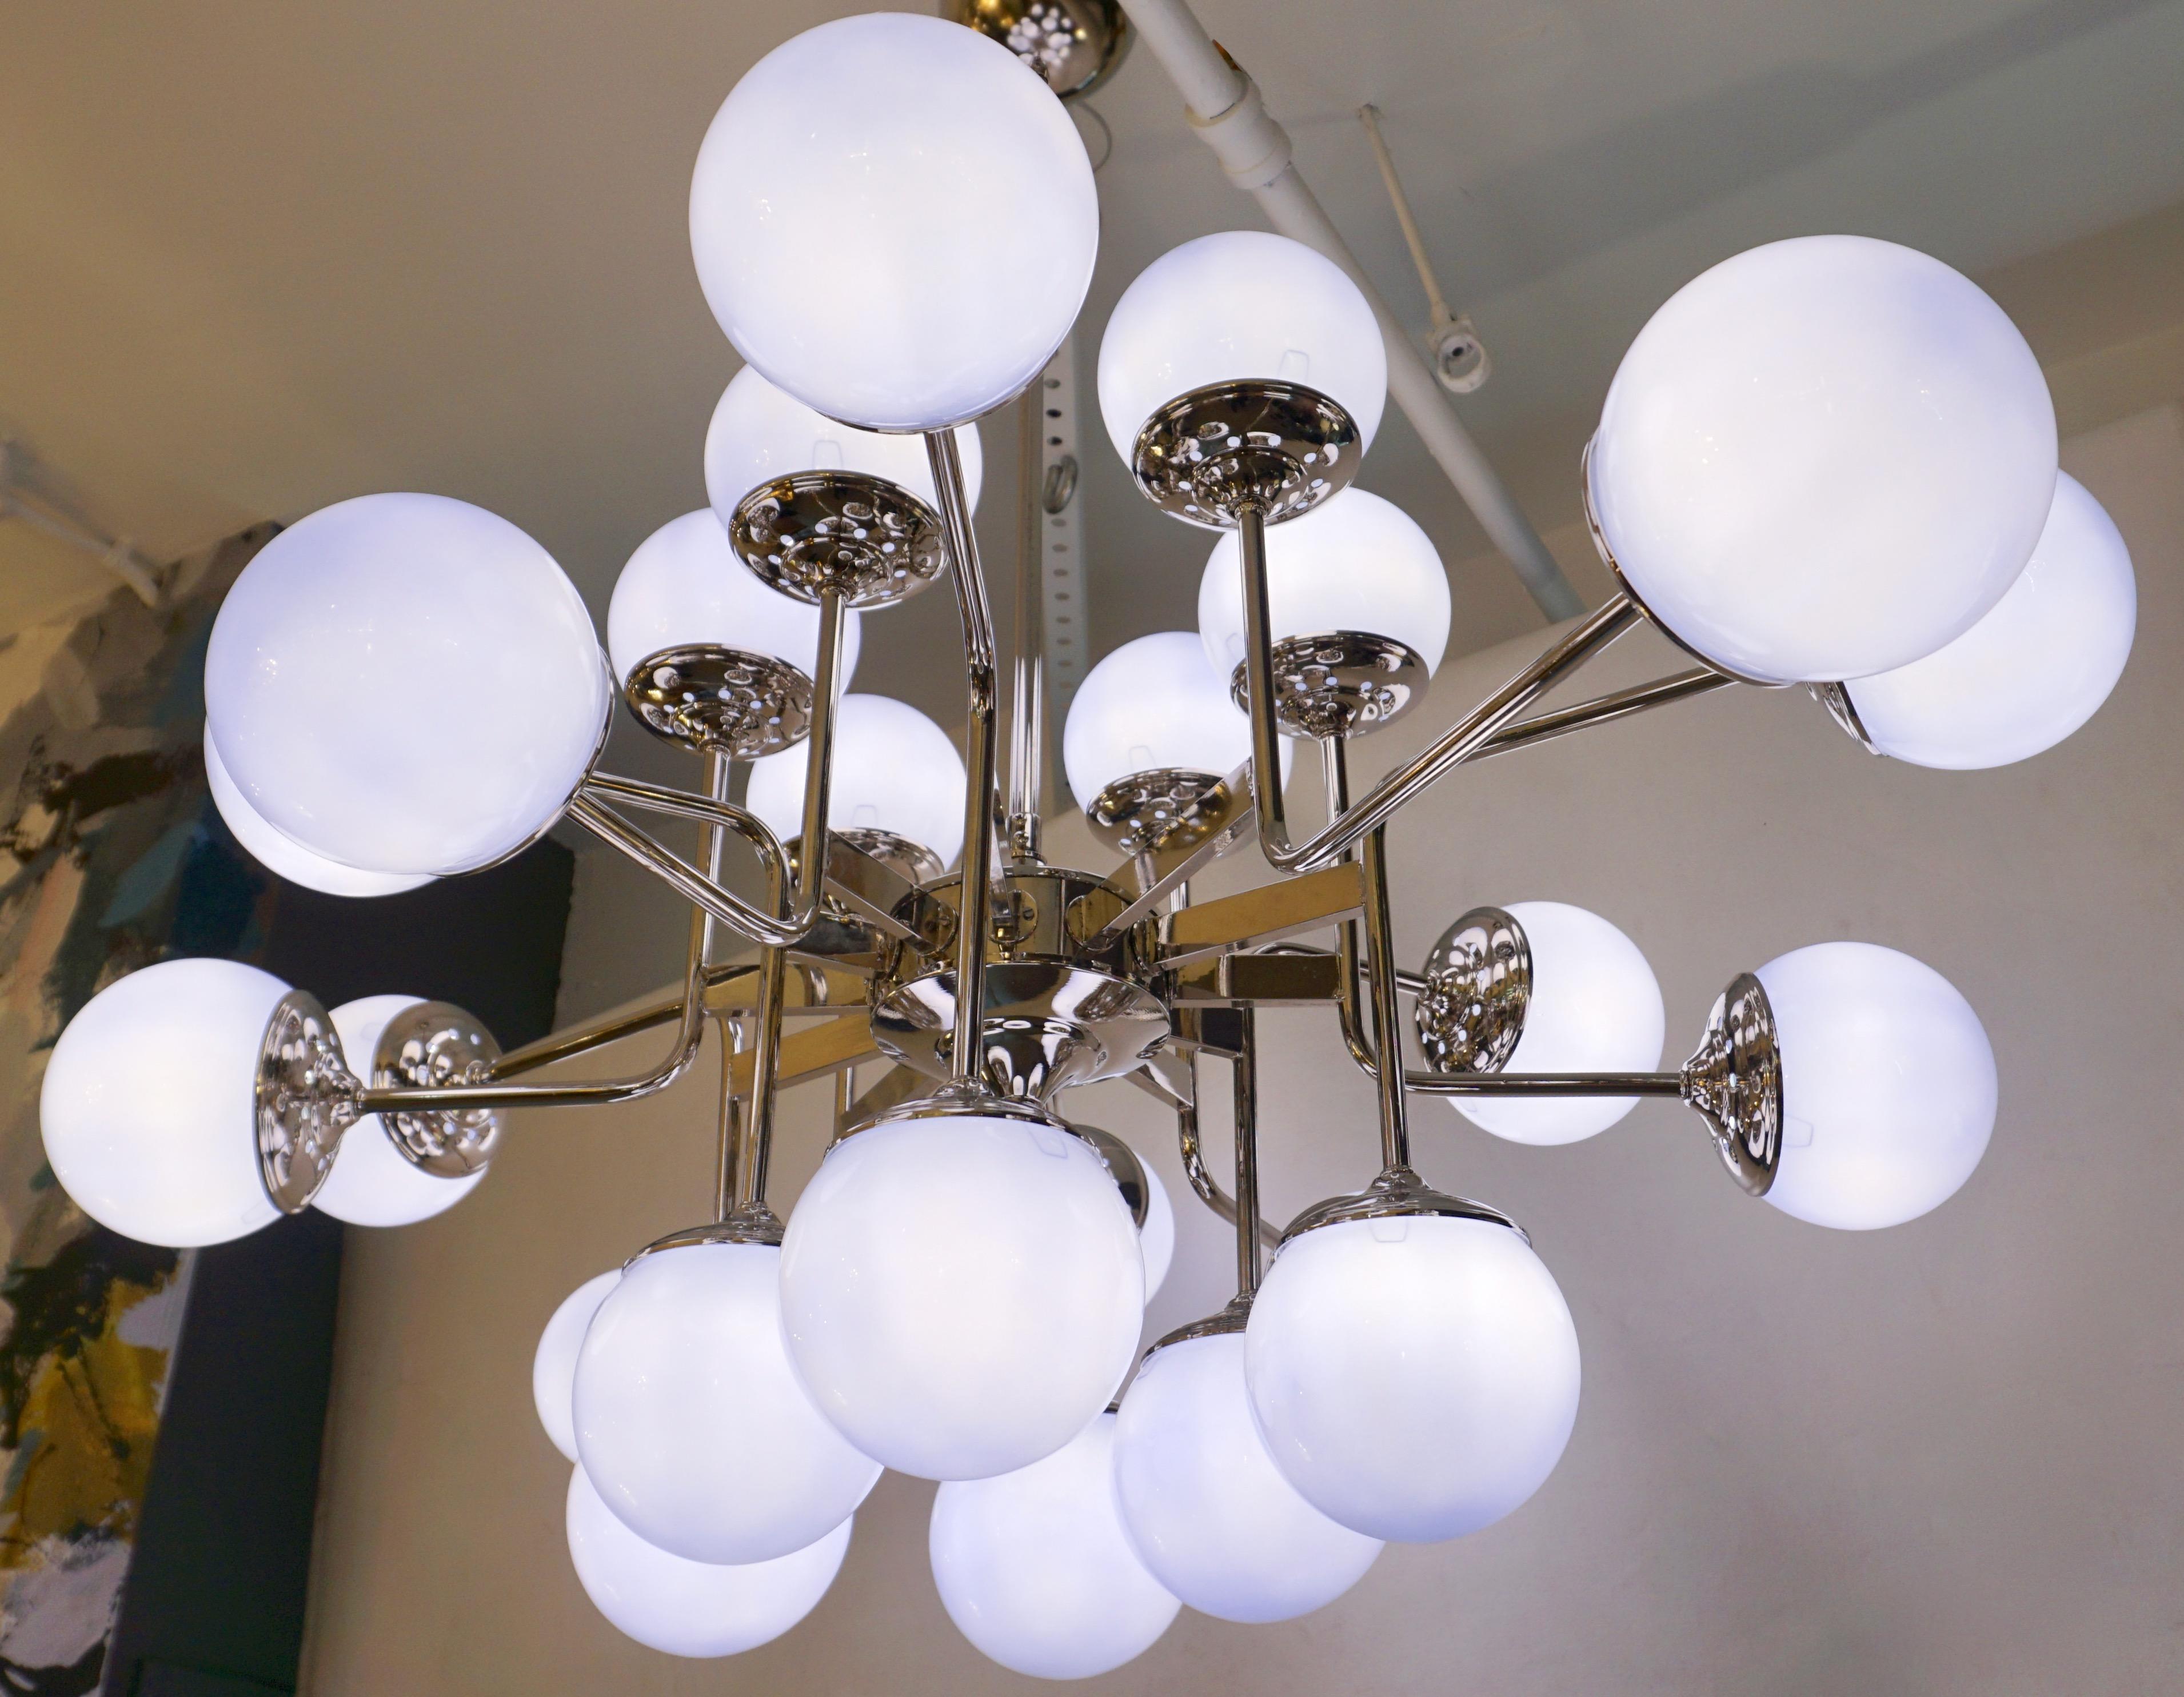 Hand-Crafted Italian 24-Light Lavender Periwinkle Murano Glass Modern Nickel Chandelier For Sale